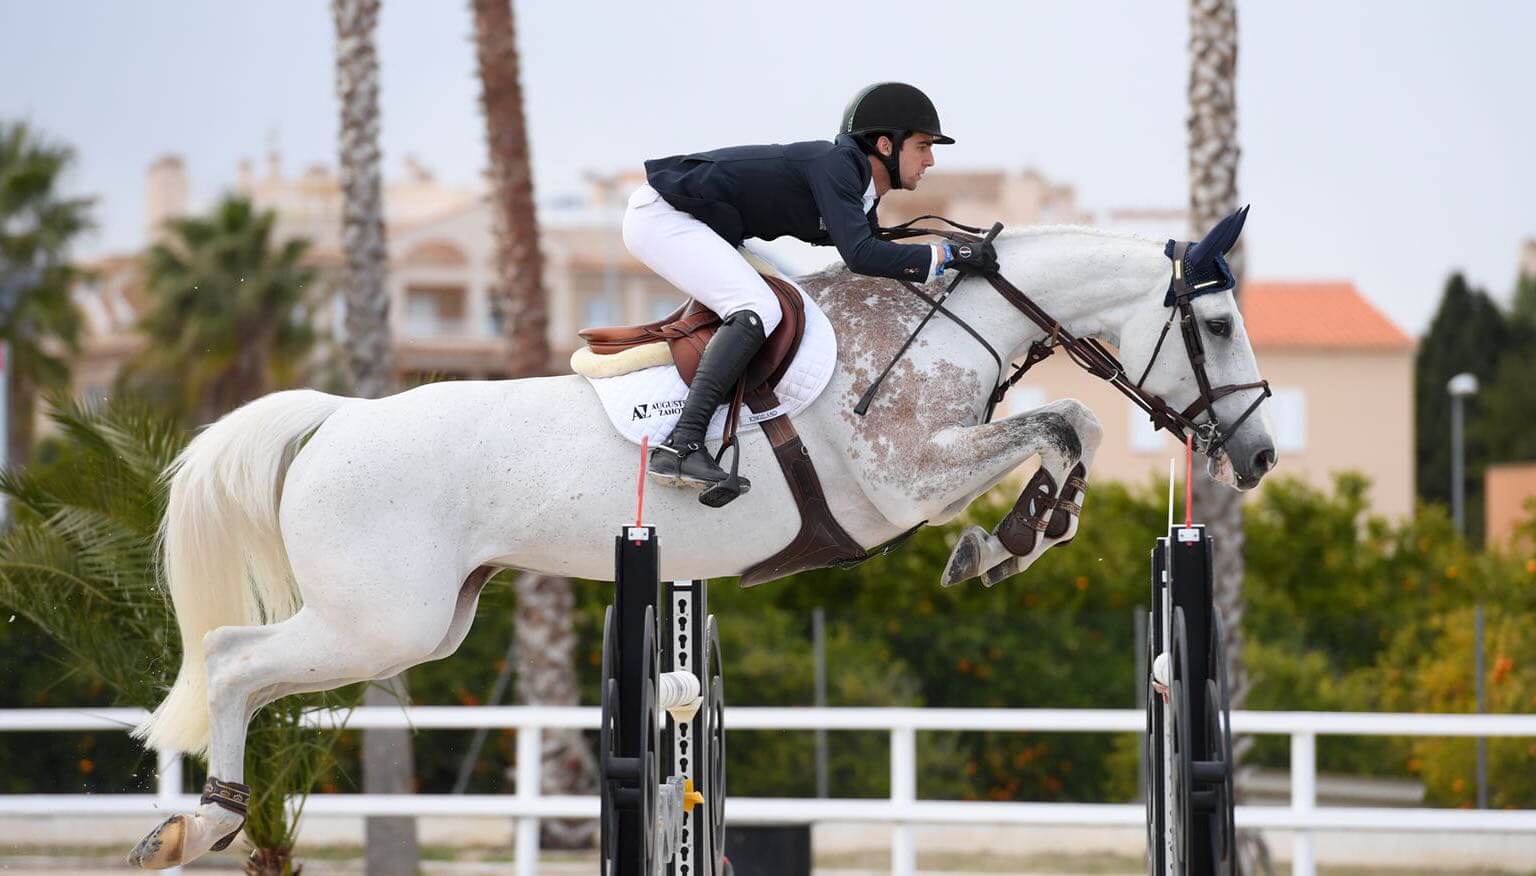 5th place for ISABEAU DE LAUBRY in Oliva Grand Prix